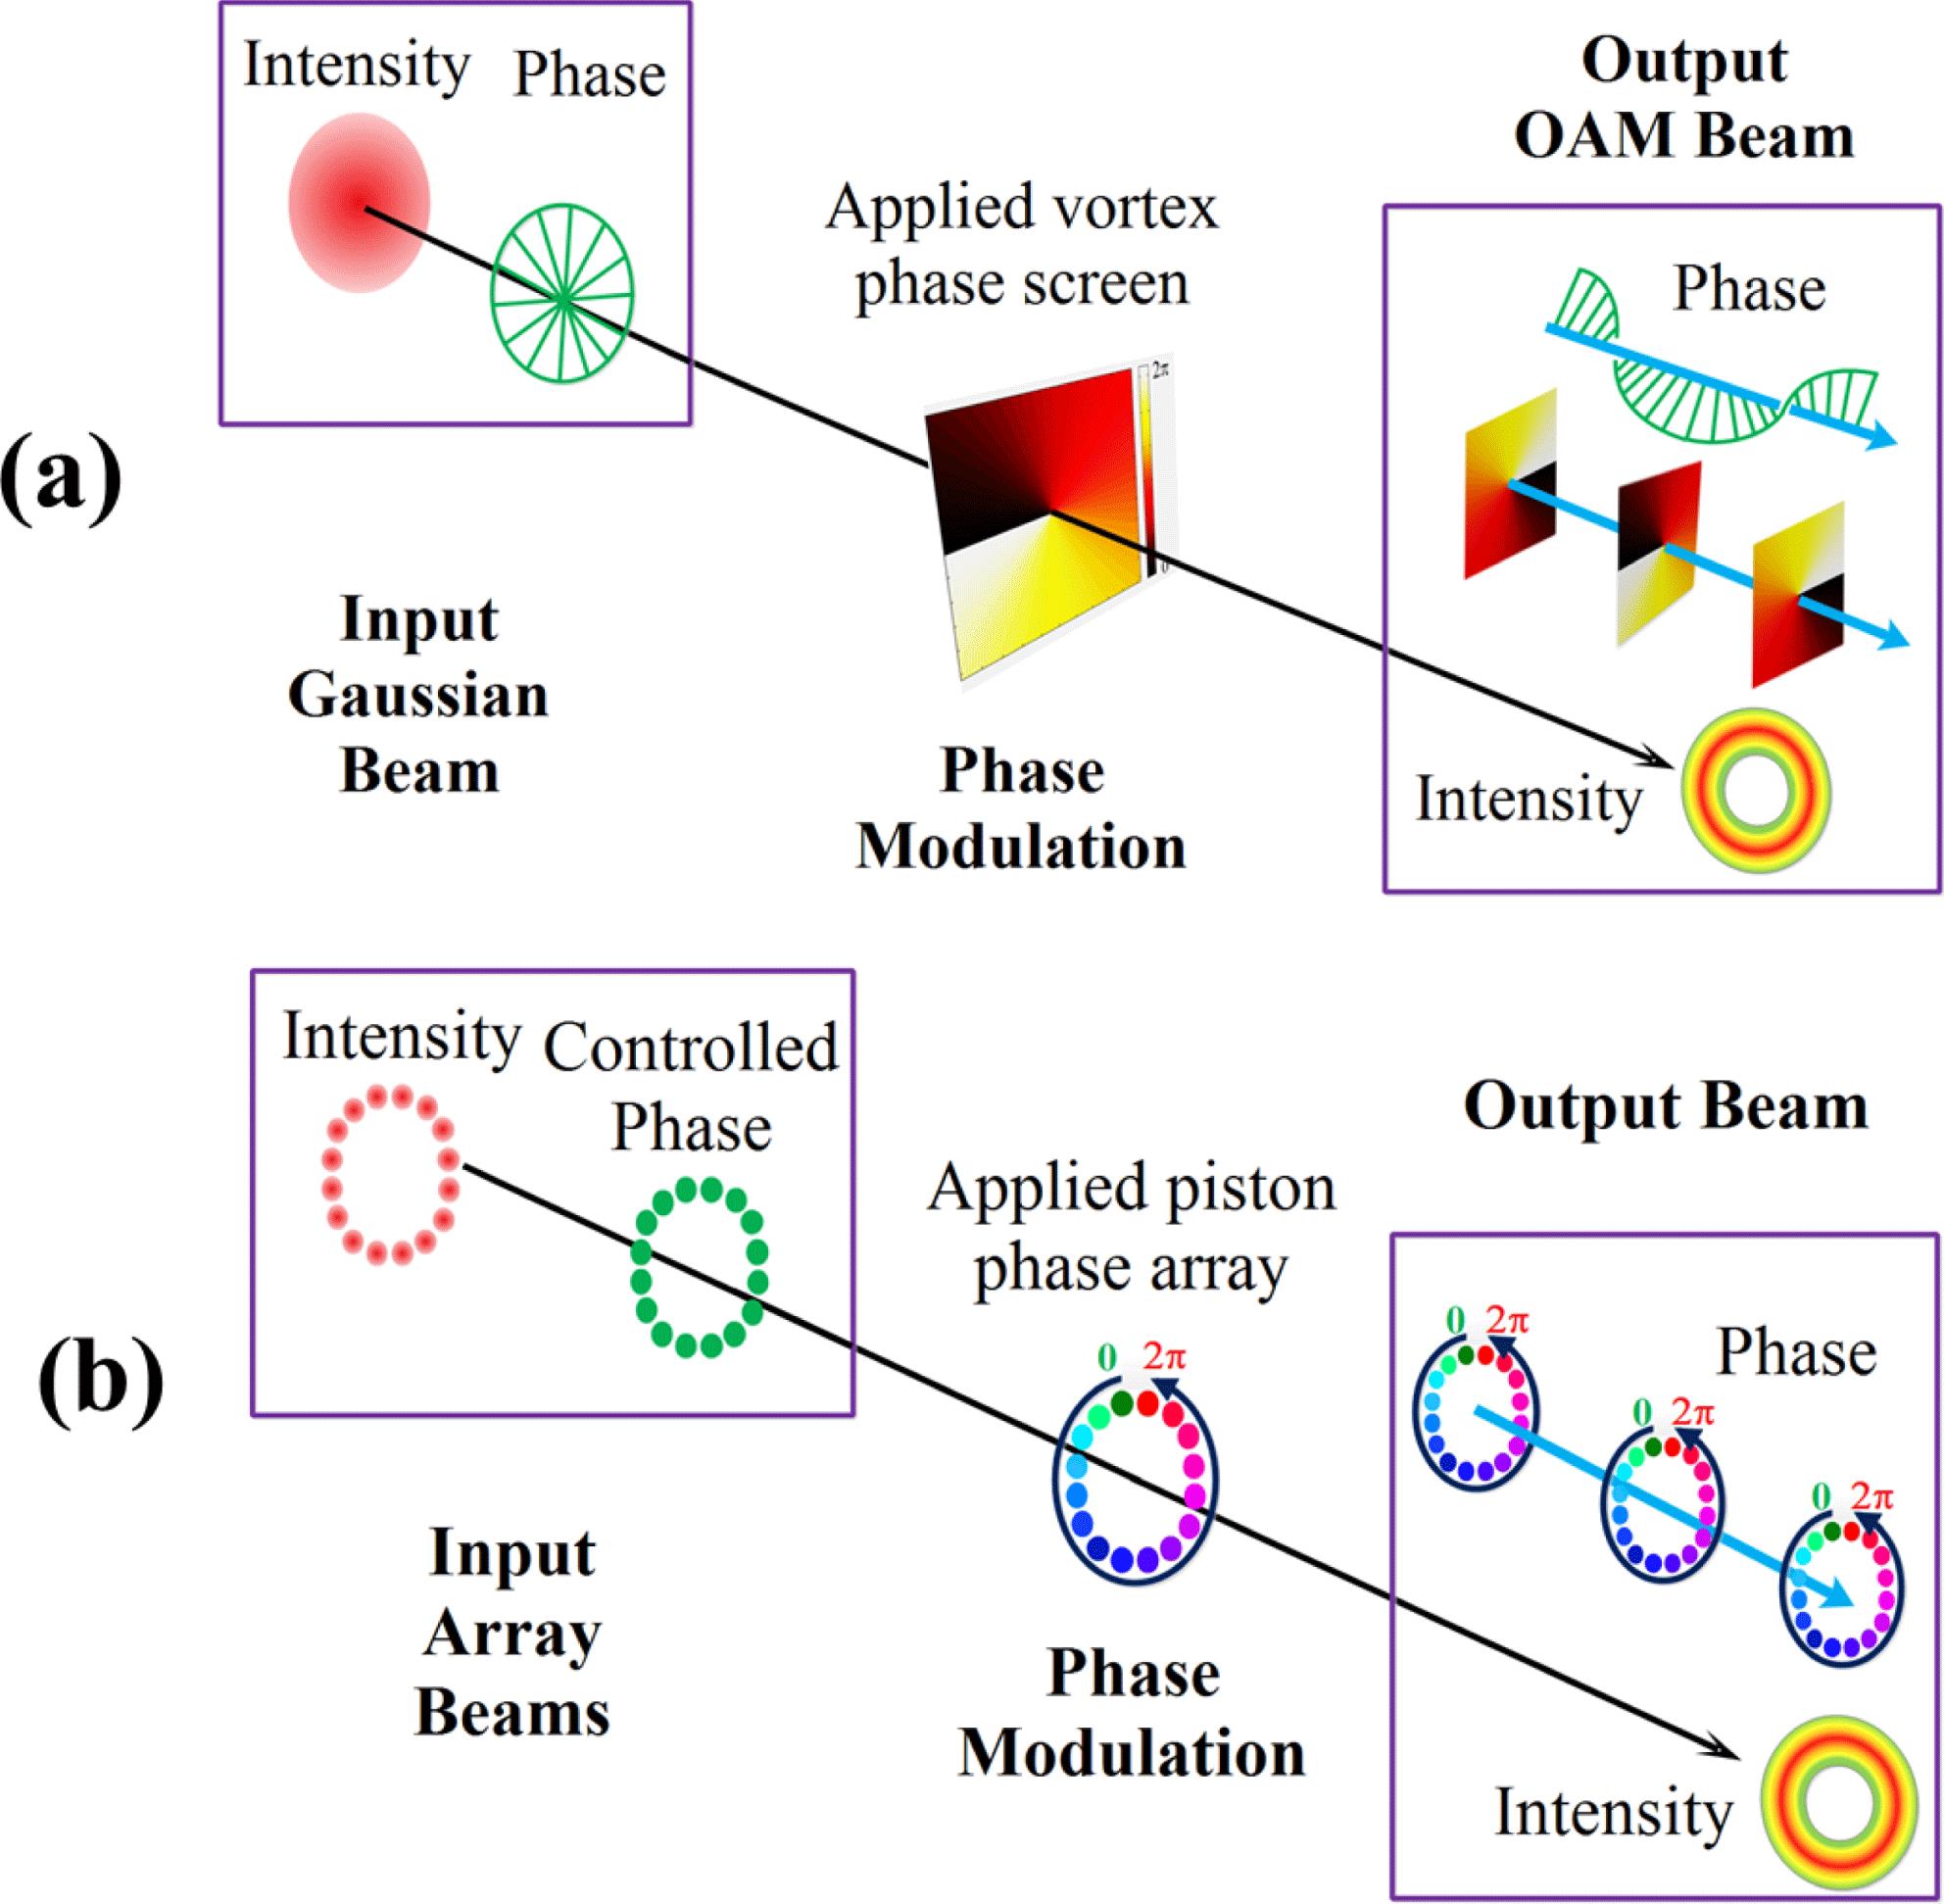 Schematics of (a) the general OAM beam generation method and (b) the novel OAM beam generation system using the beam array CBC technique.